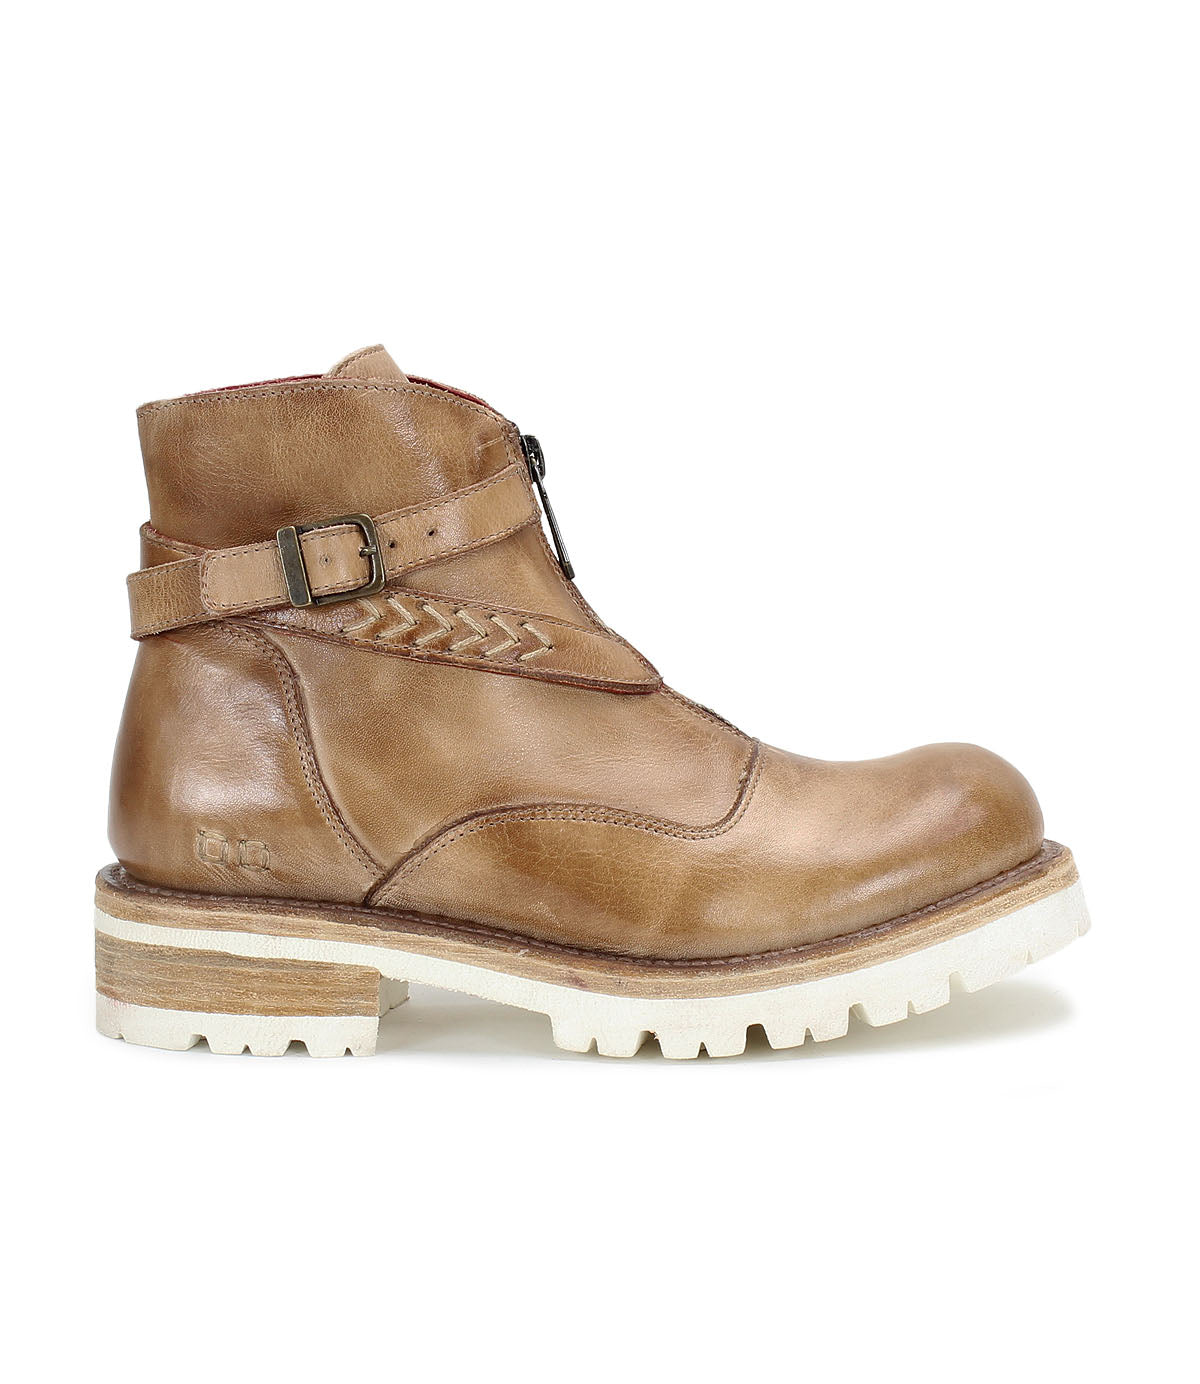 The Bed Stu Dessa women's tan leather ankle boots.